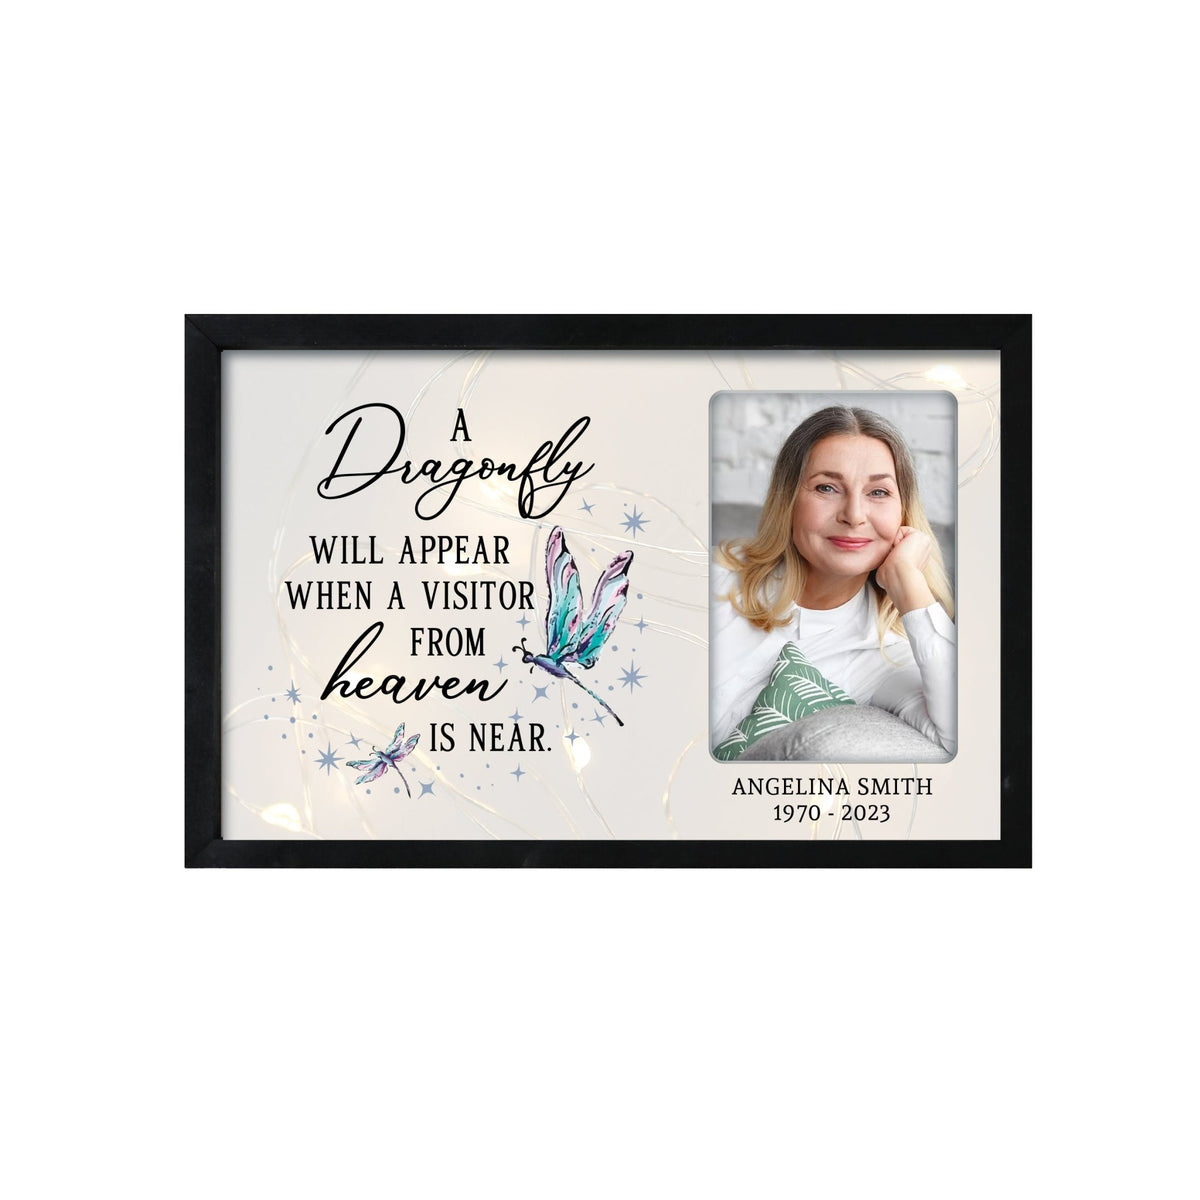 Personalized Memorial Black Framed Shadow Box With Lights Sympathy Gift Wall Décor - Dragon Fly Appear - LifeSong Milestones